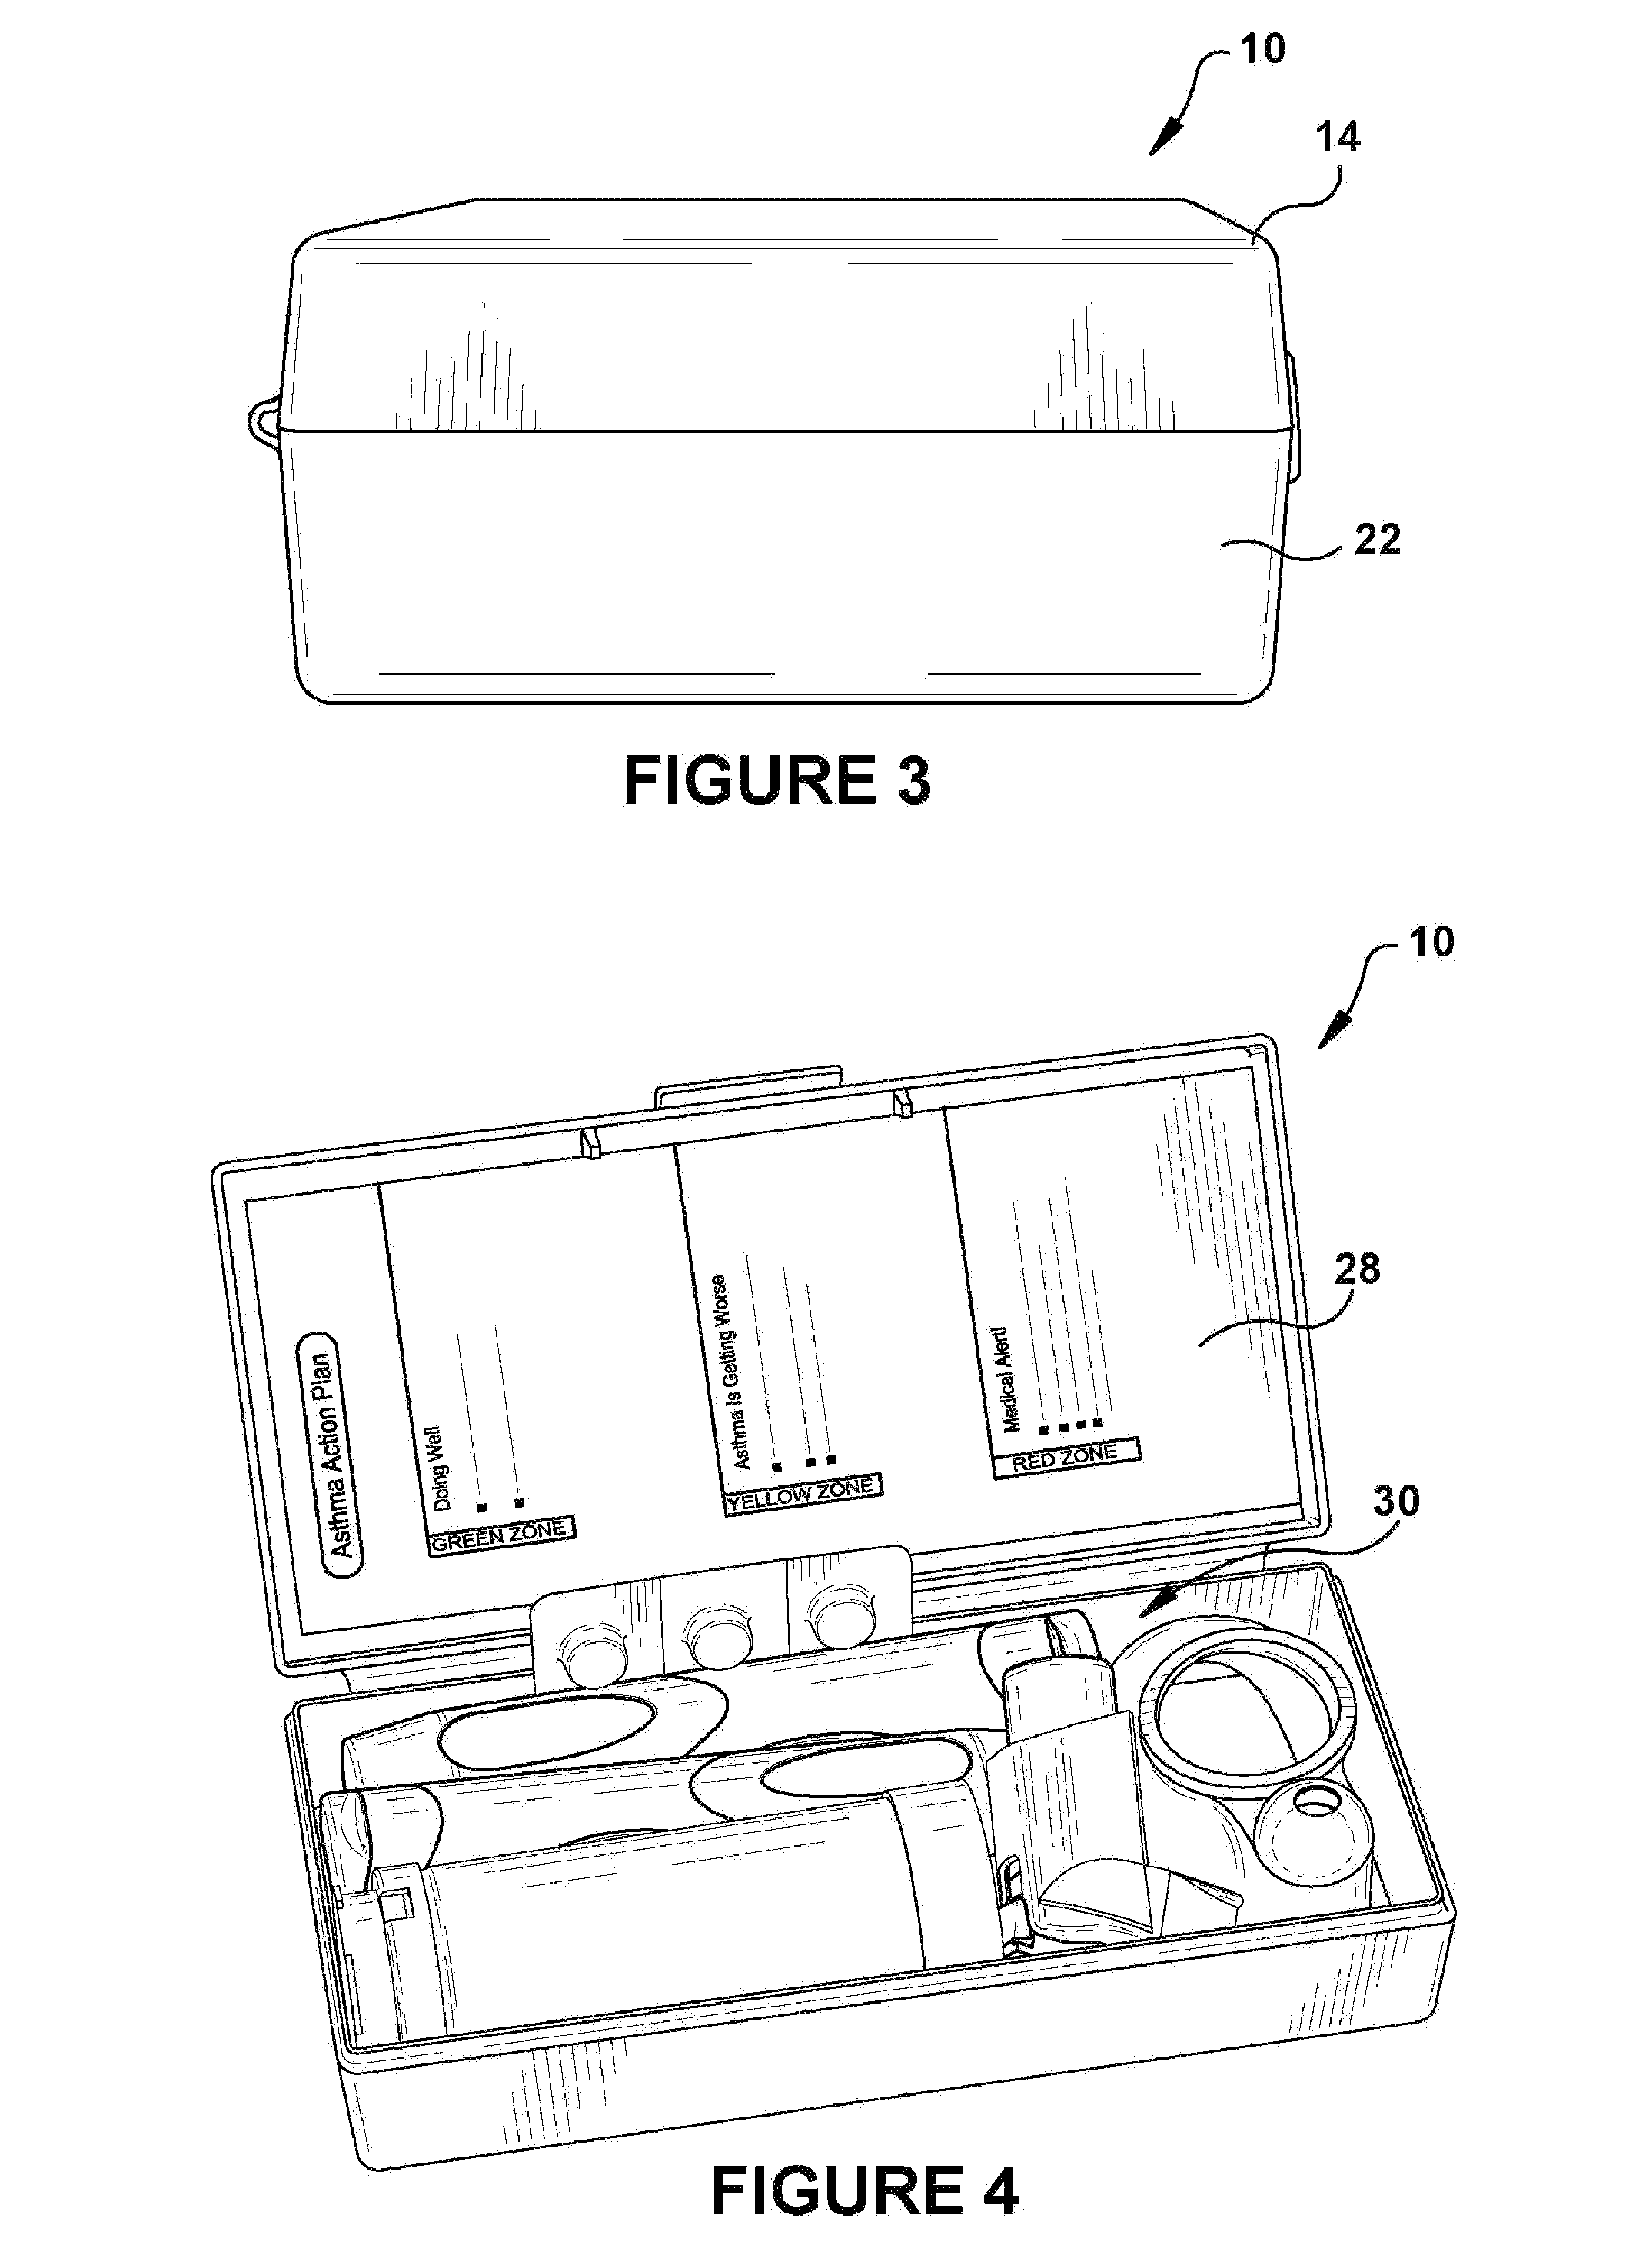 System for Medication Information and Storage